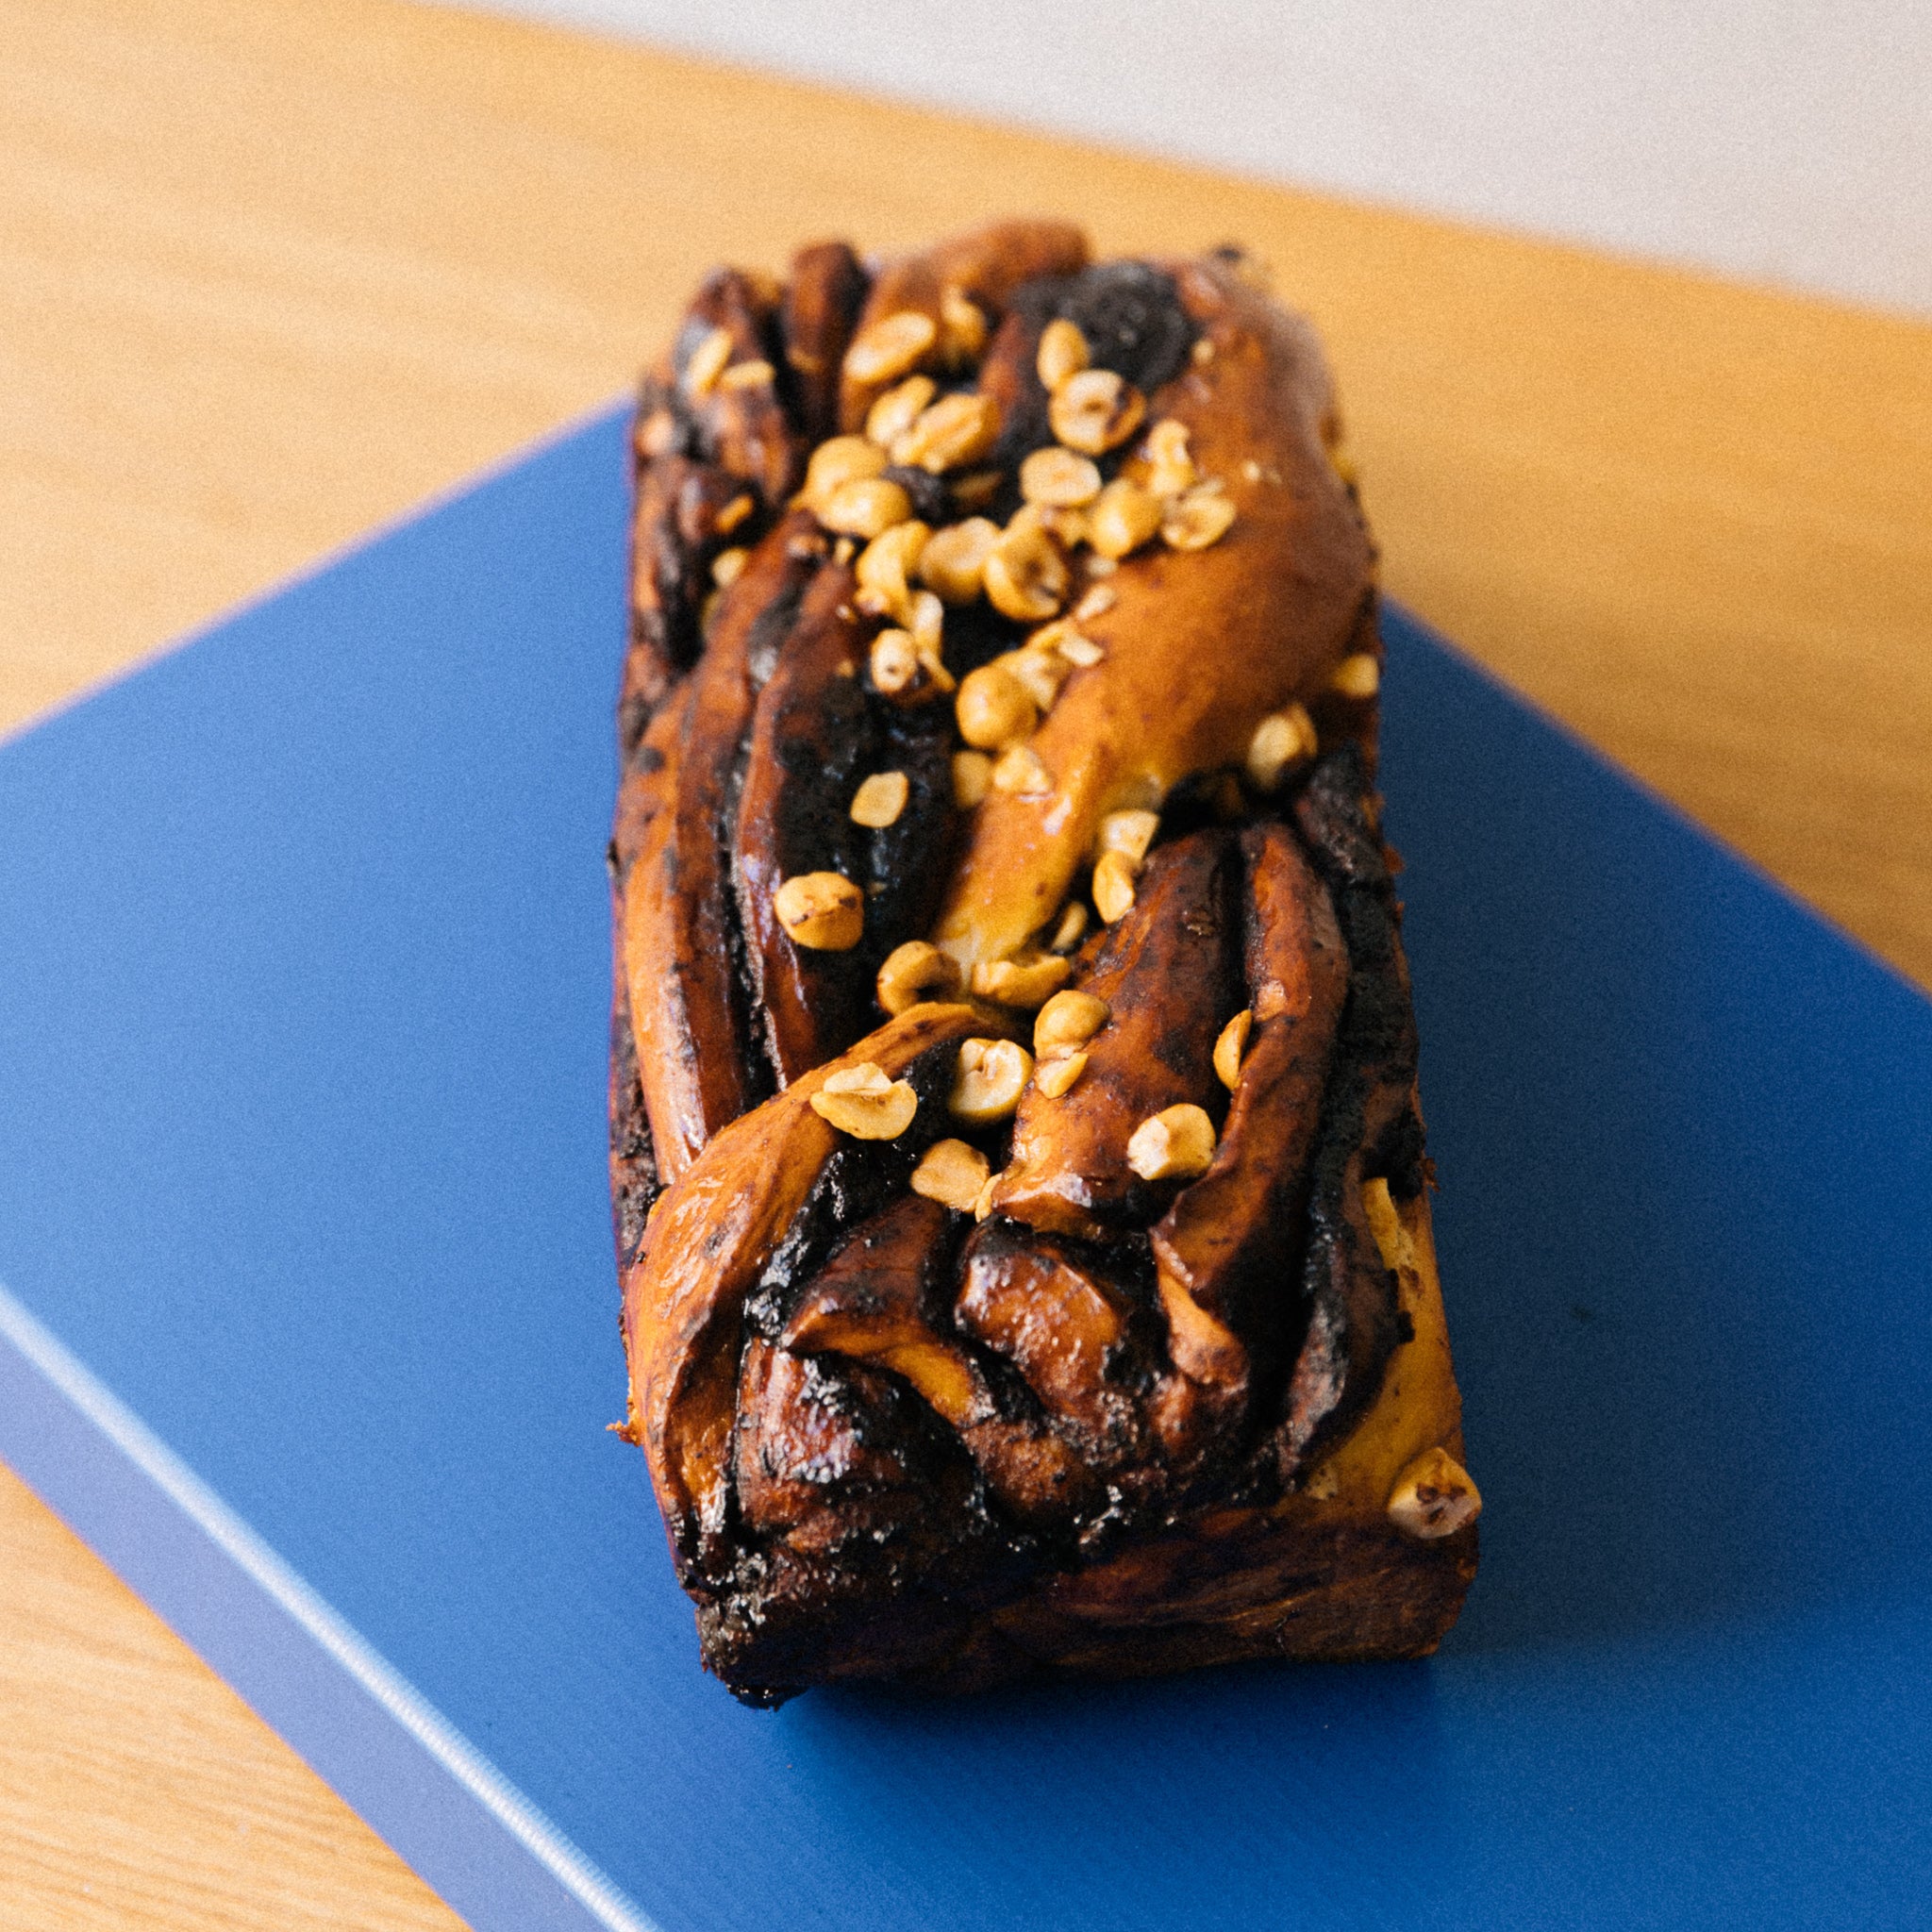 Brioche filled with dark chocolate and hazelnuts. Our babka has a rich, soft dough, sweetened with organic coconut palm sugar and a luscious caramelized crust.   100% plant-based & vegan-friendly | Allergens: Gluten & nuts.